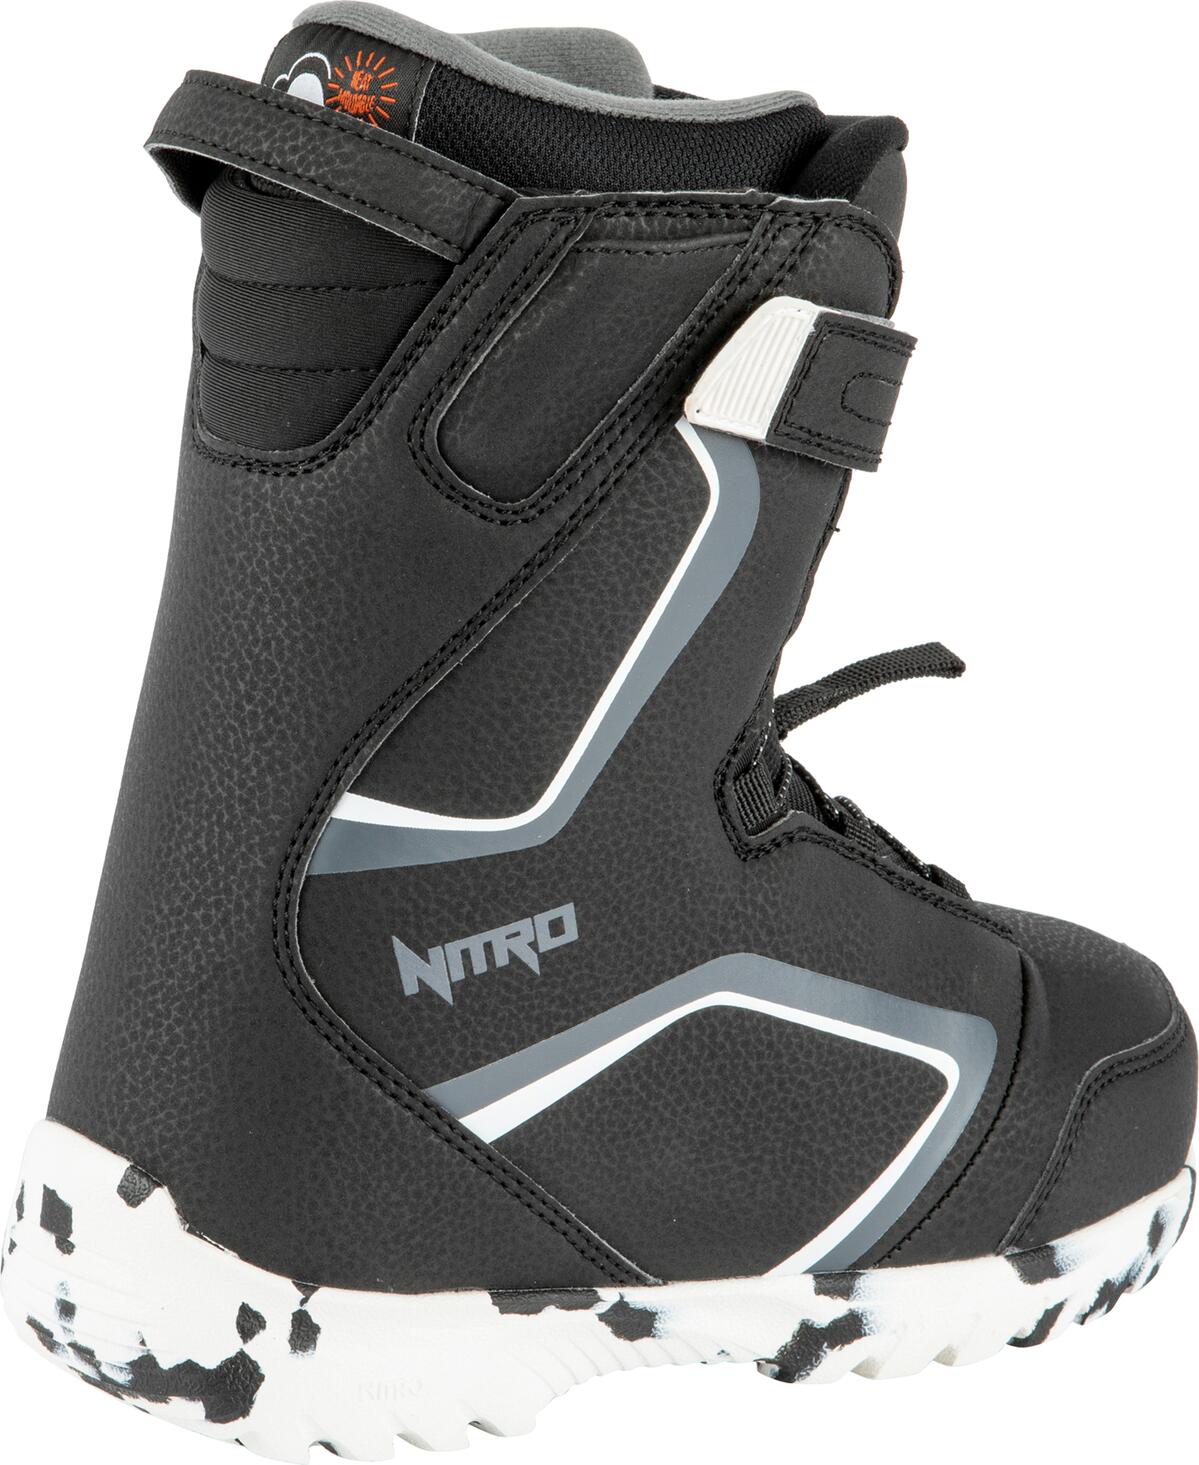 Snowboard Boat Navy Bl-Grey-Yell 24.5 Nitro Snowboards Unisex Youth Droid QLS 20 All Mountain Freestyle Speed Lacing System Cheap Childrens Boat 